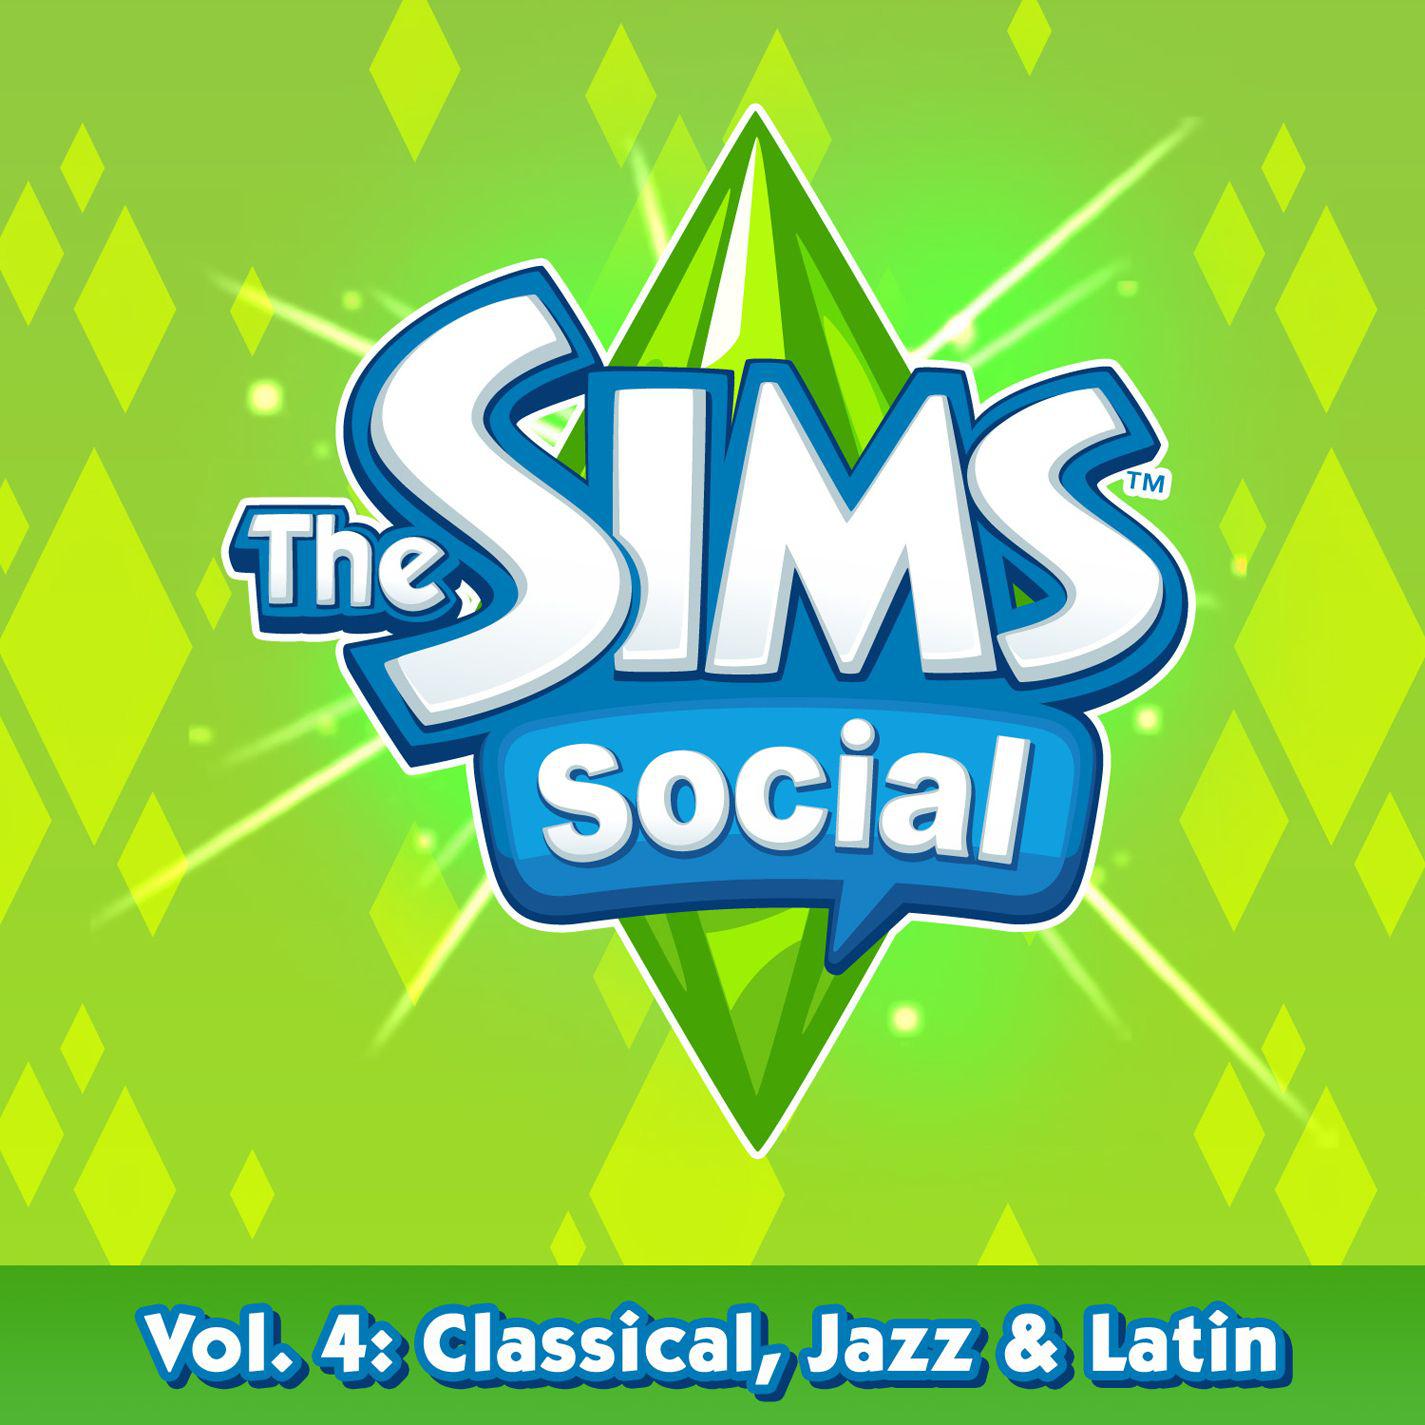 The Sims Social Volume 3: Metal, Country & Bluegrass